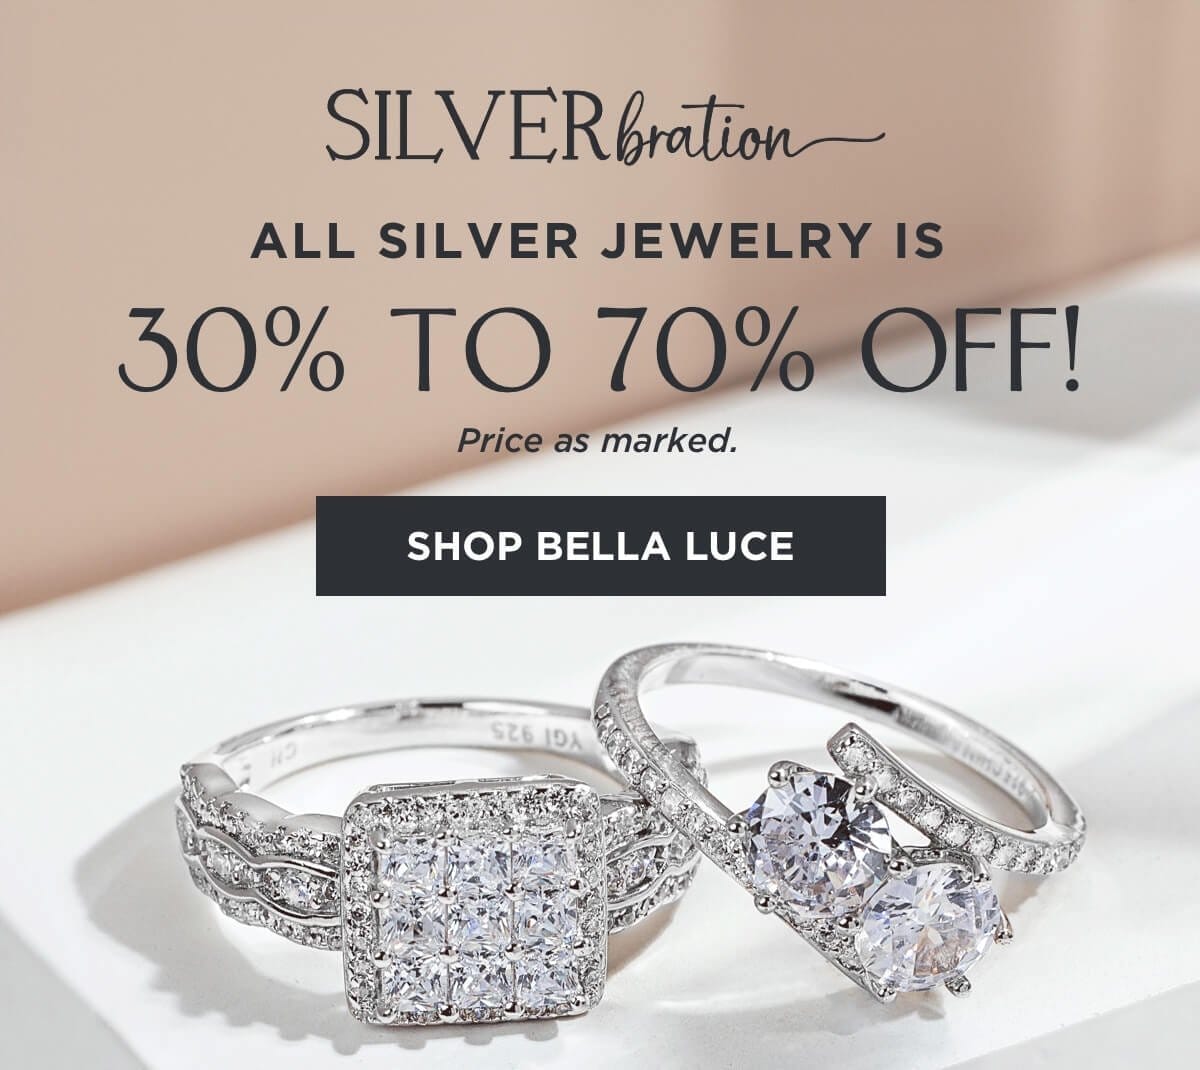 Shop silver Bella Luce jewelry 30% to 70% off. Price as marked